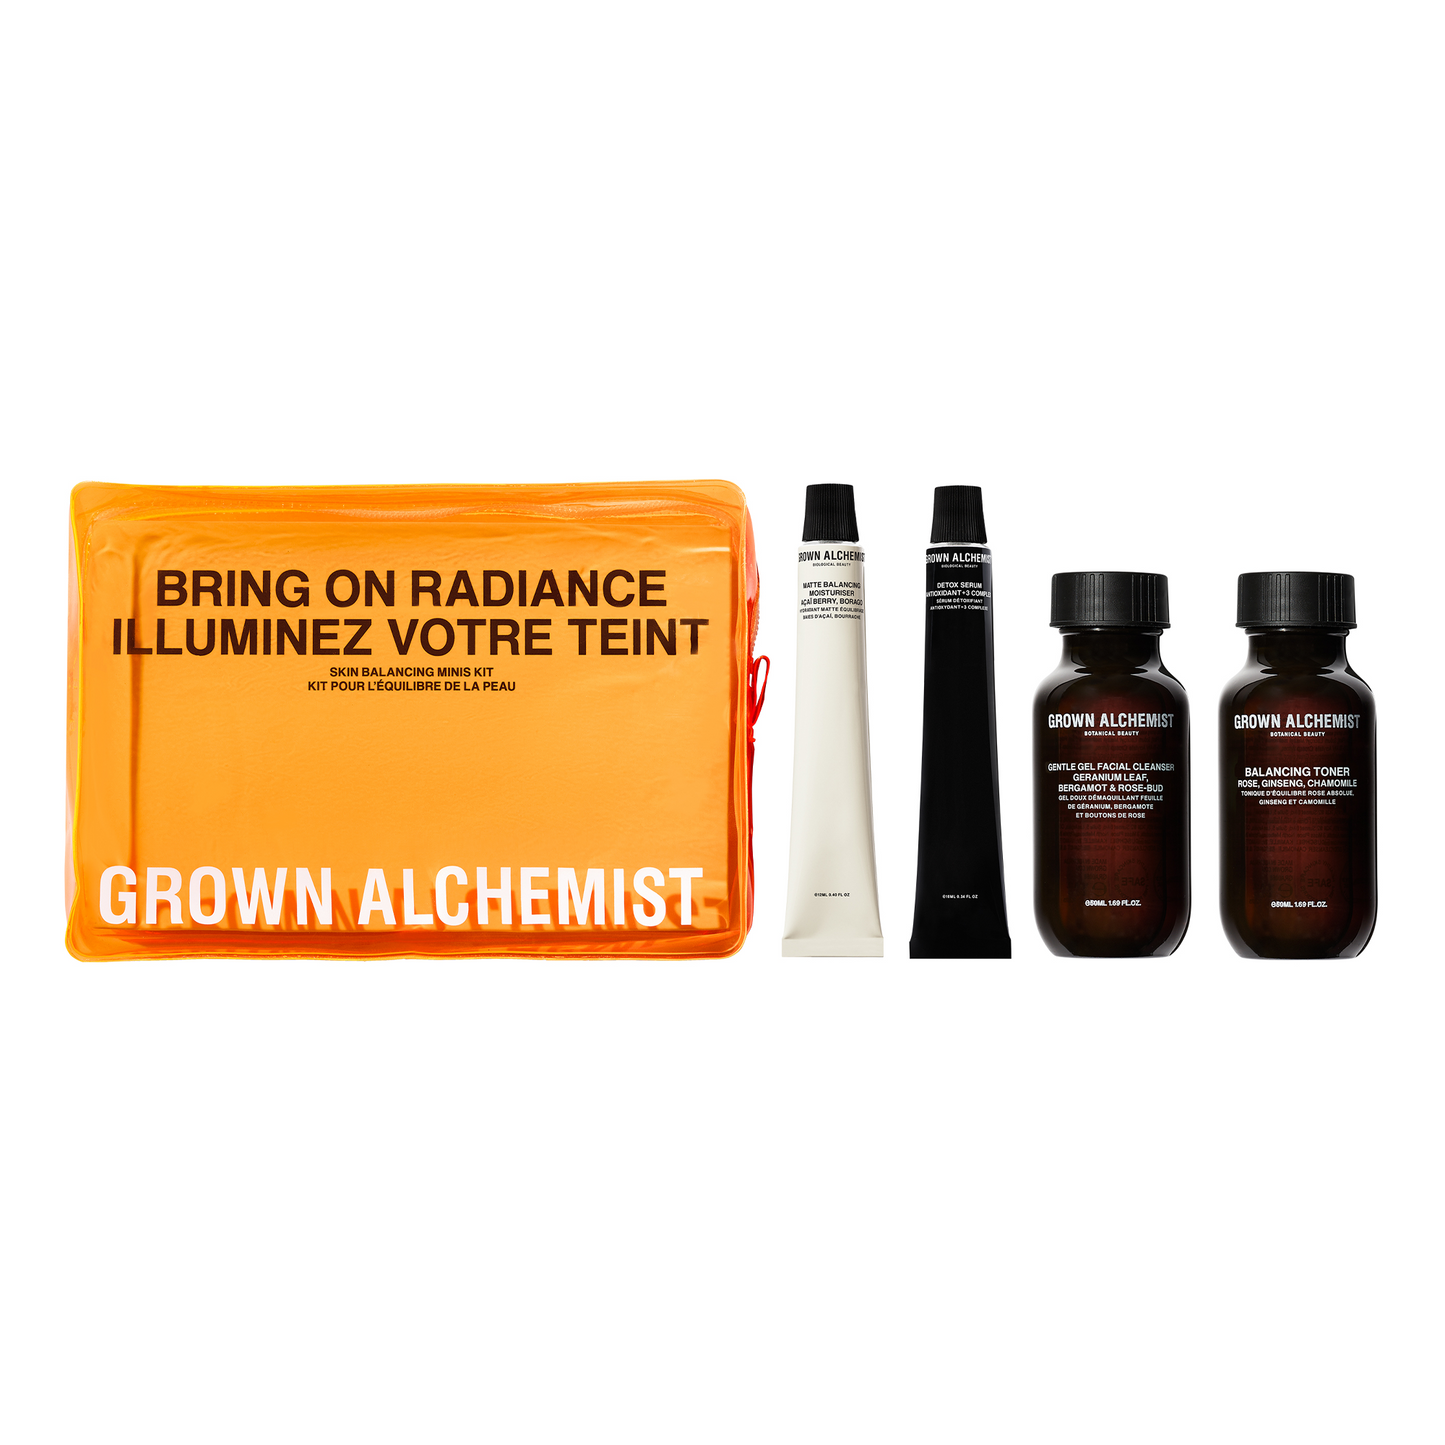 Grown Alchemist Skin Balancing Mini Kit: Achieve radiant, healthier-looking skin with the Skin Balancing Mini Kit, a four-piece set of Grown Alchemist favorites to cleanse, tone, detox and moisturize for a soft, supple and more balanced complexion.